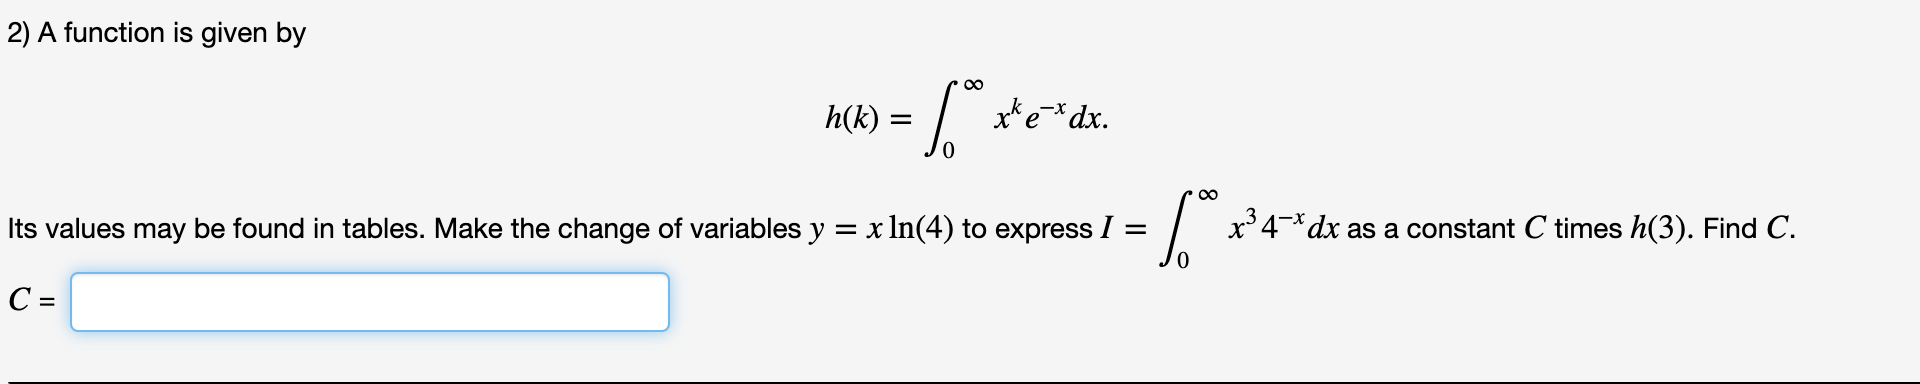 2) A function is given by
00
x* e=*dx.
*e*dx.
h(k)
00
Its values may be found in tables. Make the change of variables y = x In(4) to express I =
x34-*dx
as a constant C times h(3). Find C.
